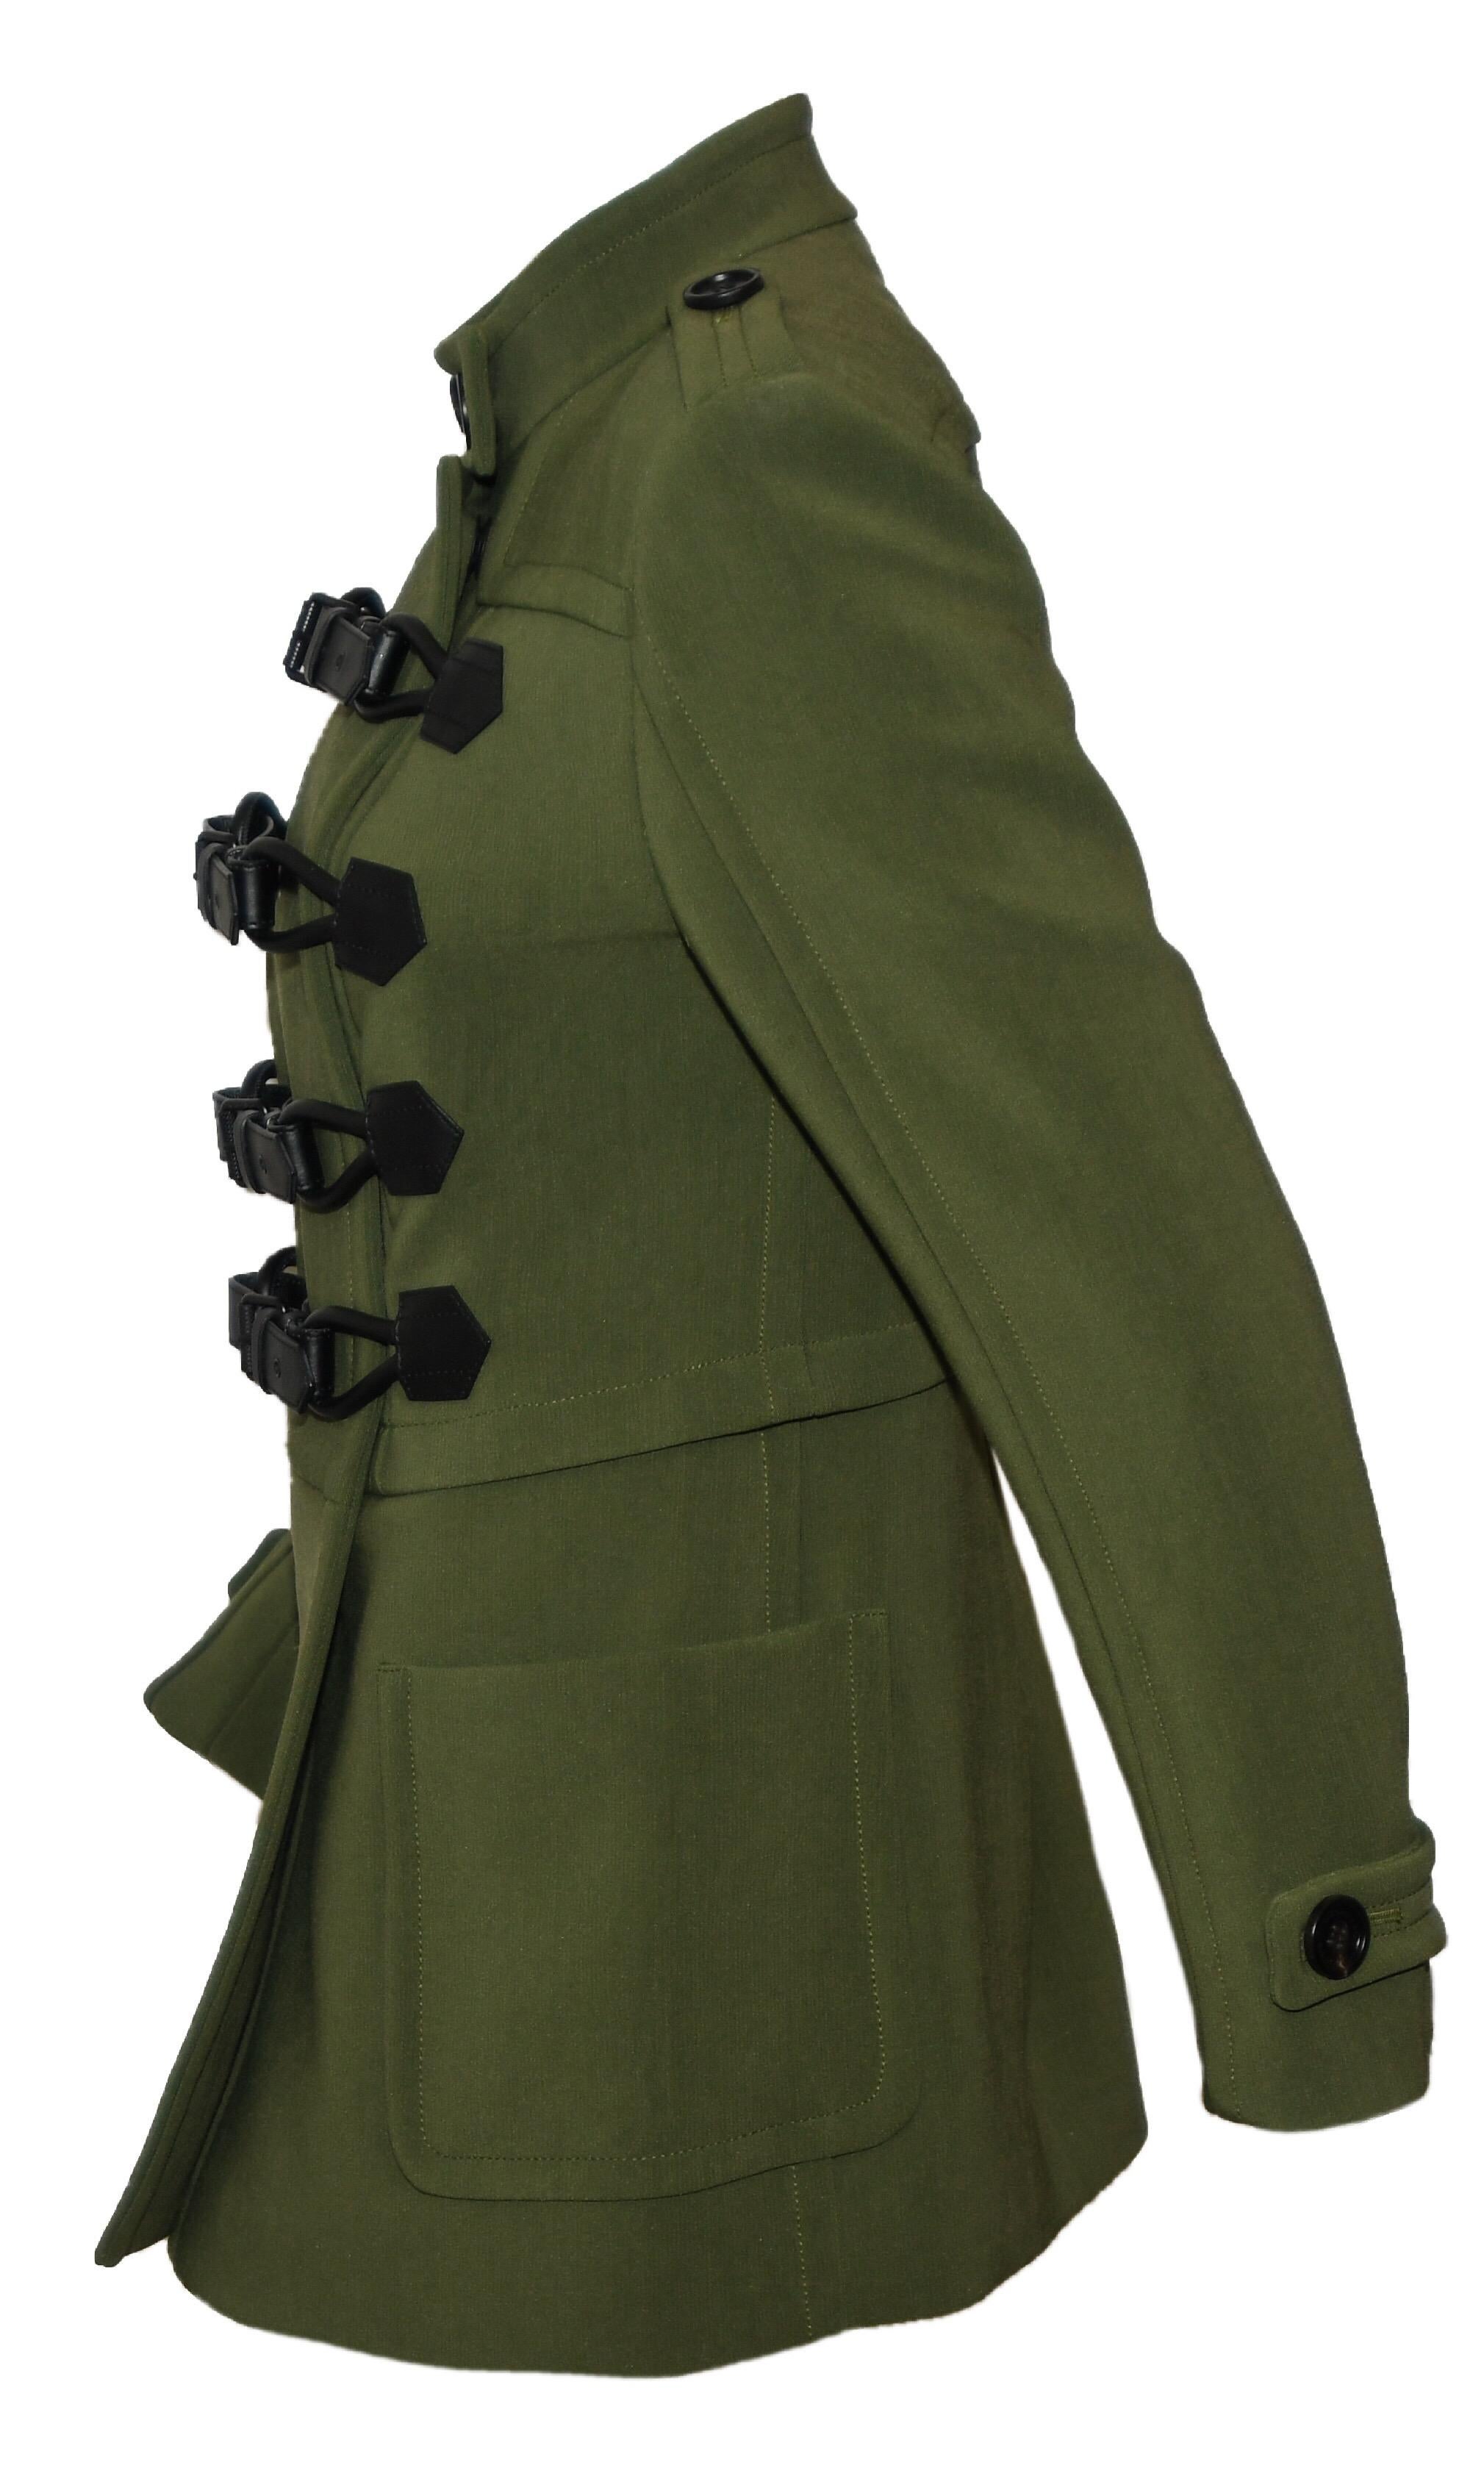 Burberry military green jacket includes 4 black leather belts & buckles for closure, at front.  This Burberry long jacket is typical brit heritage label as it continues its bid for global domination. It certainly suggested that they are on track.